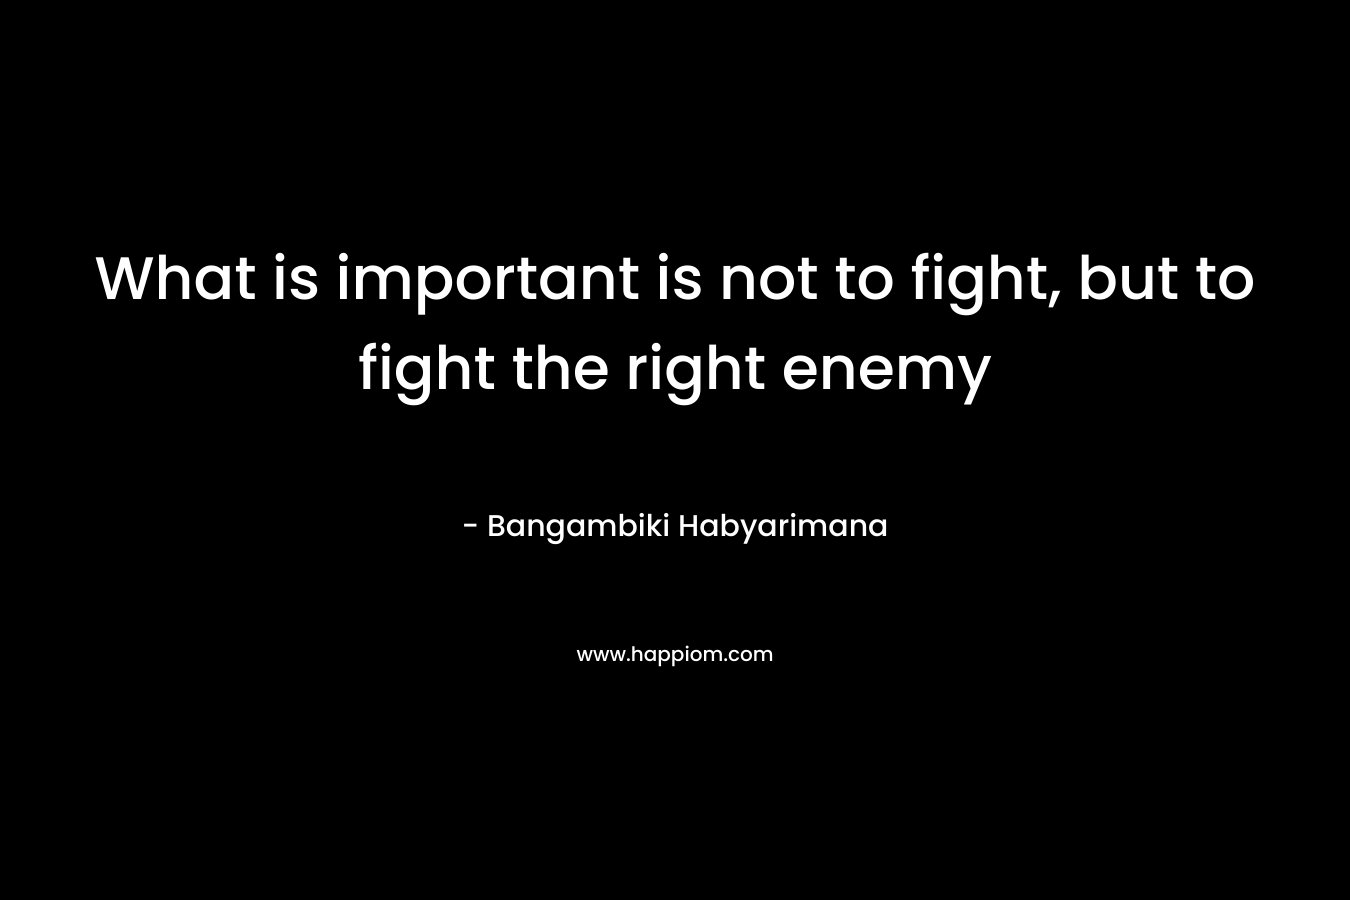 What is important is not to fight, but to fight the right enemy – Bangambiki Habyarimana